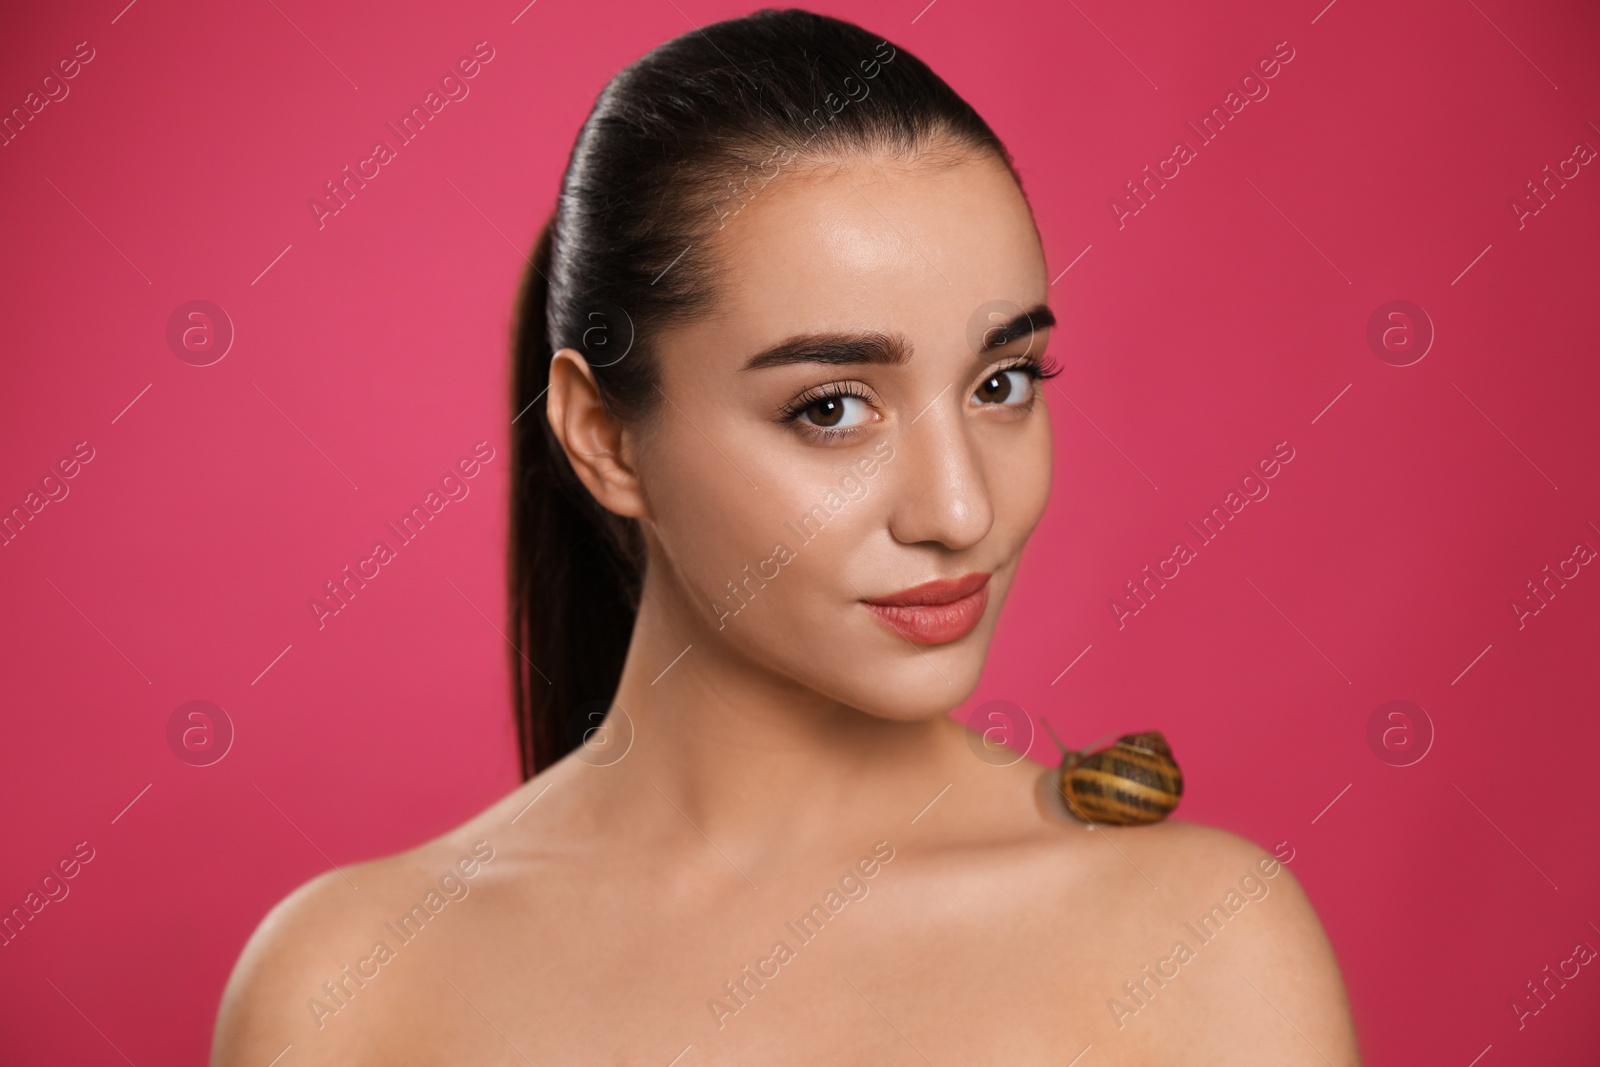 Photo of Beautiful young woman with snail on her shoulder against pink background